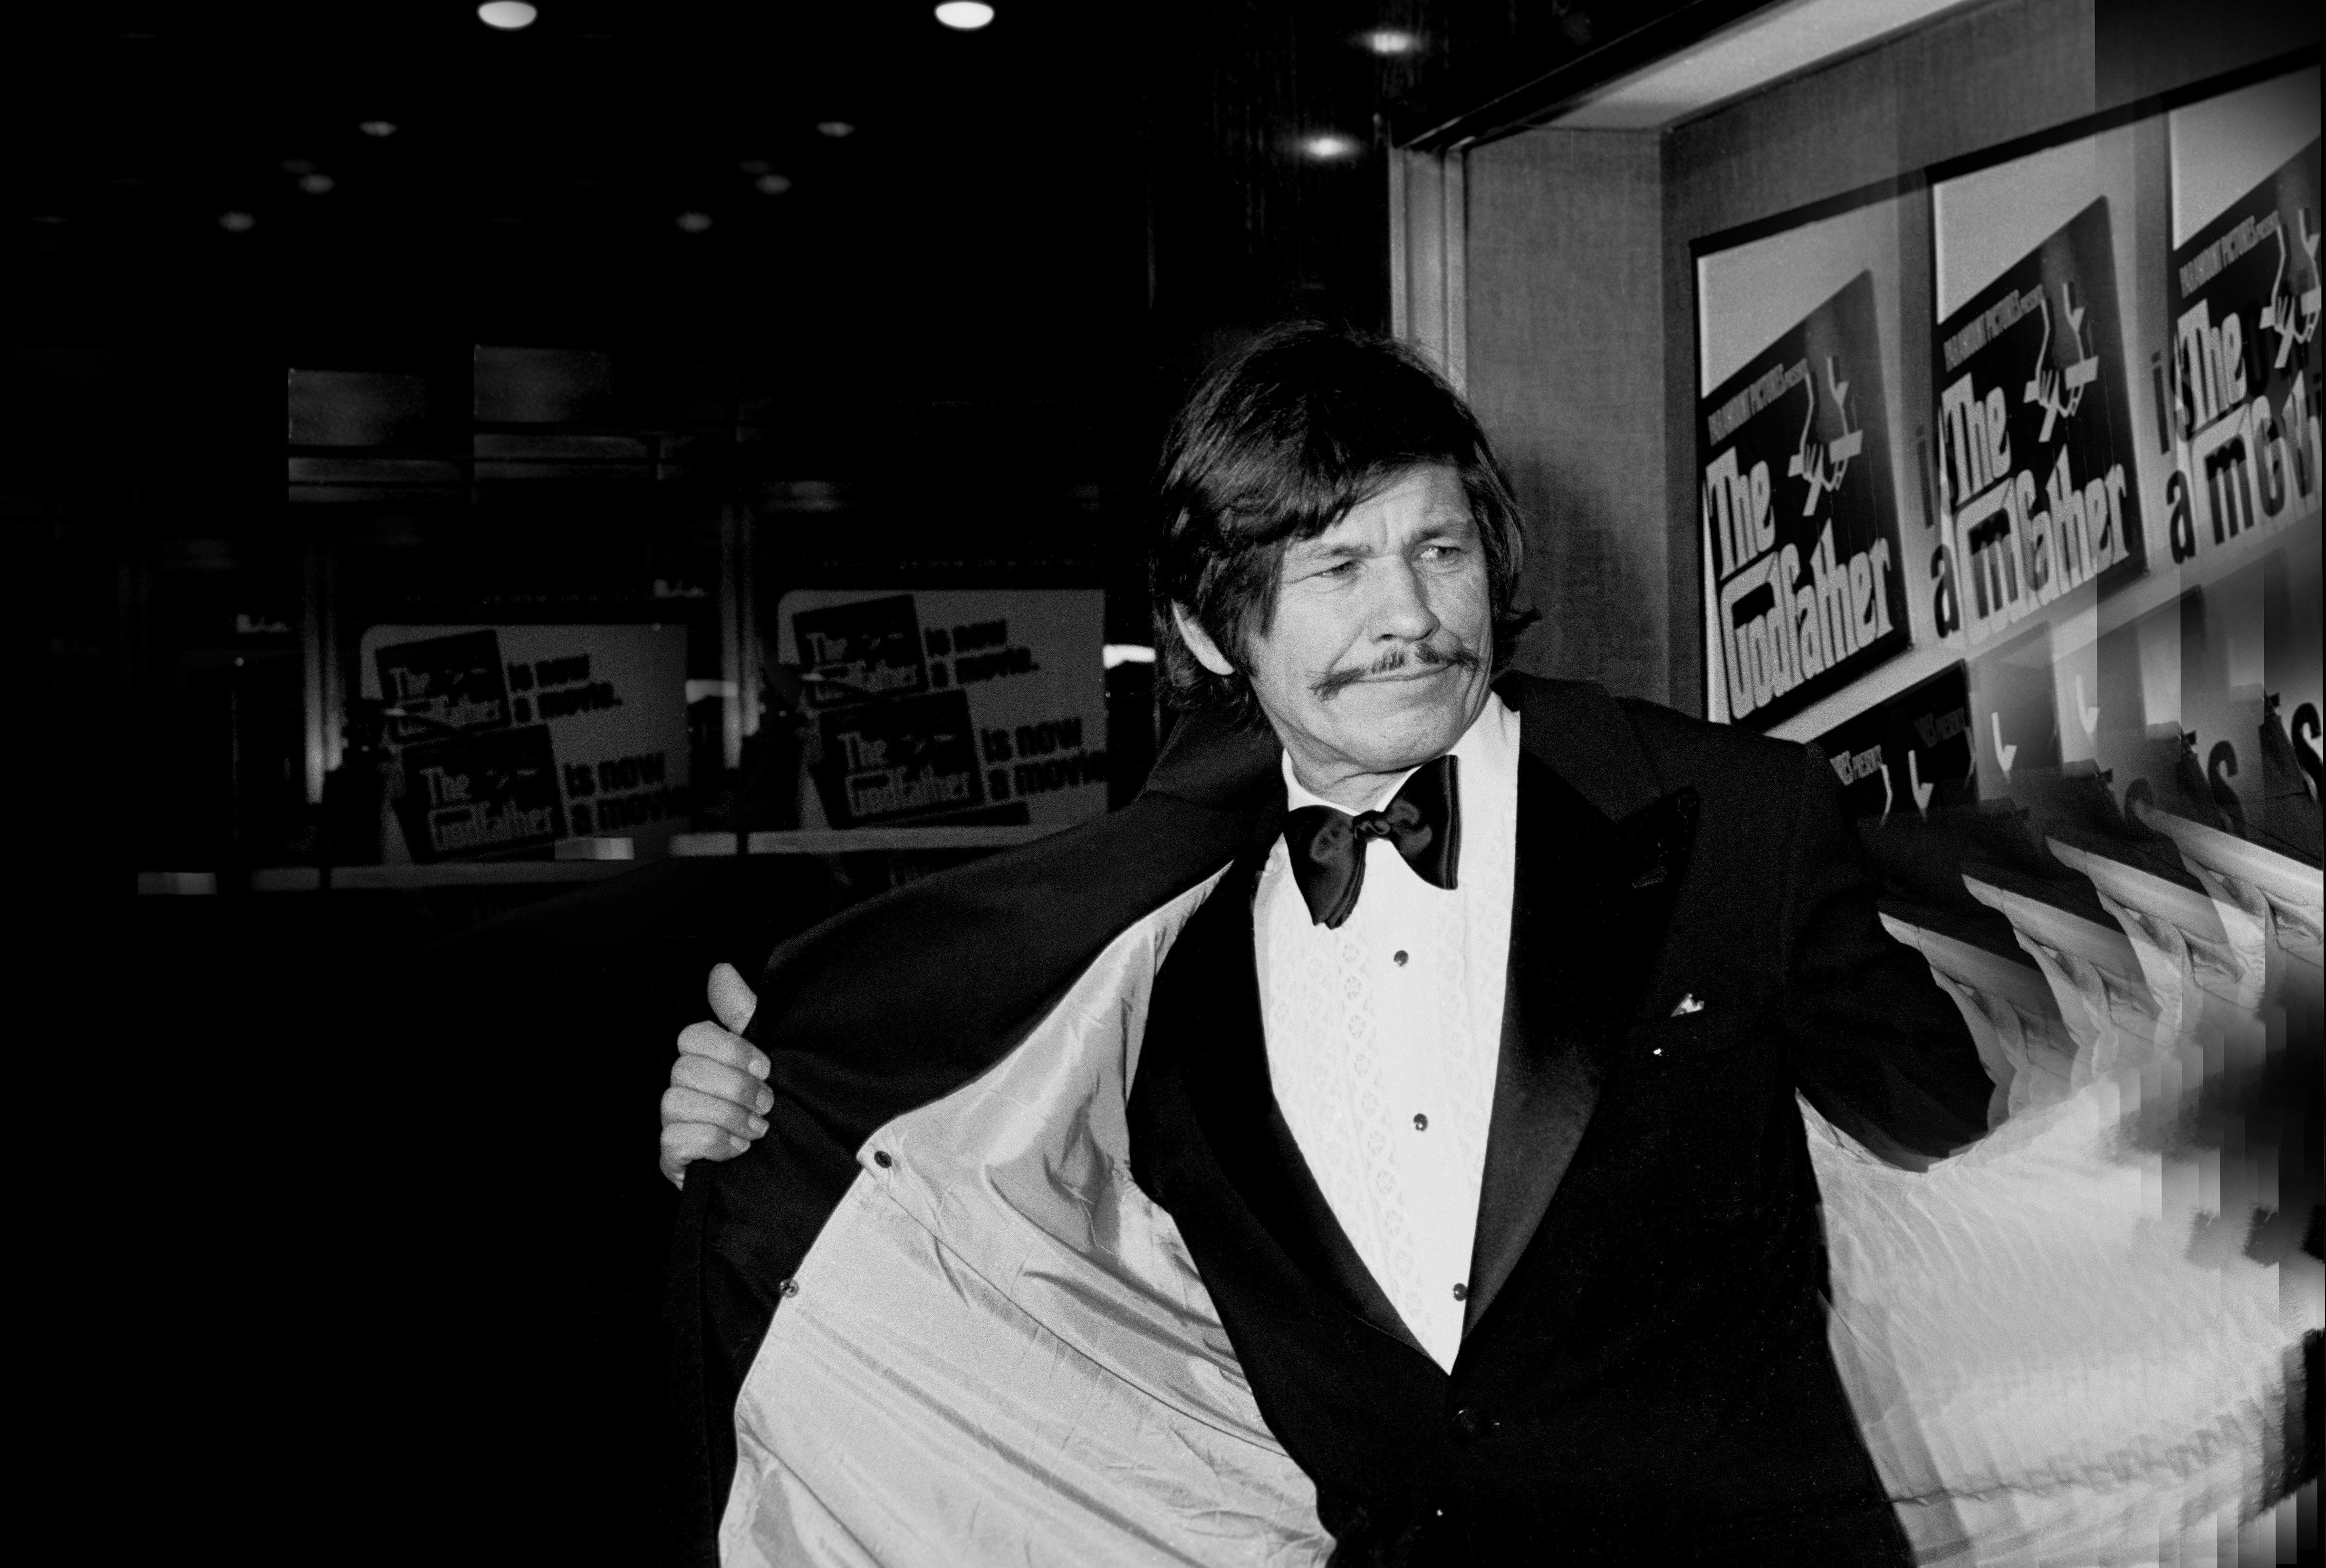 Actor Charles Bronson during the premiere of "The Godfather" on March 14,1972 in New York, New York. / Source: Getty Images